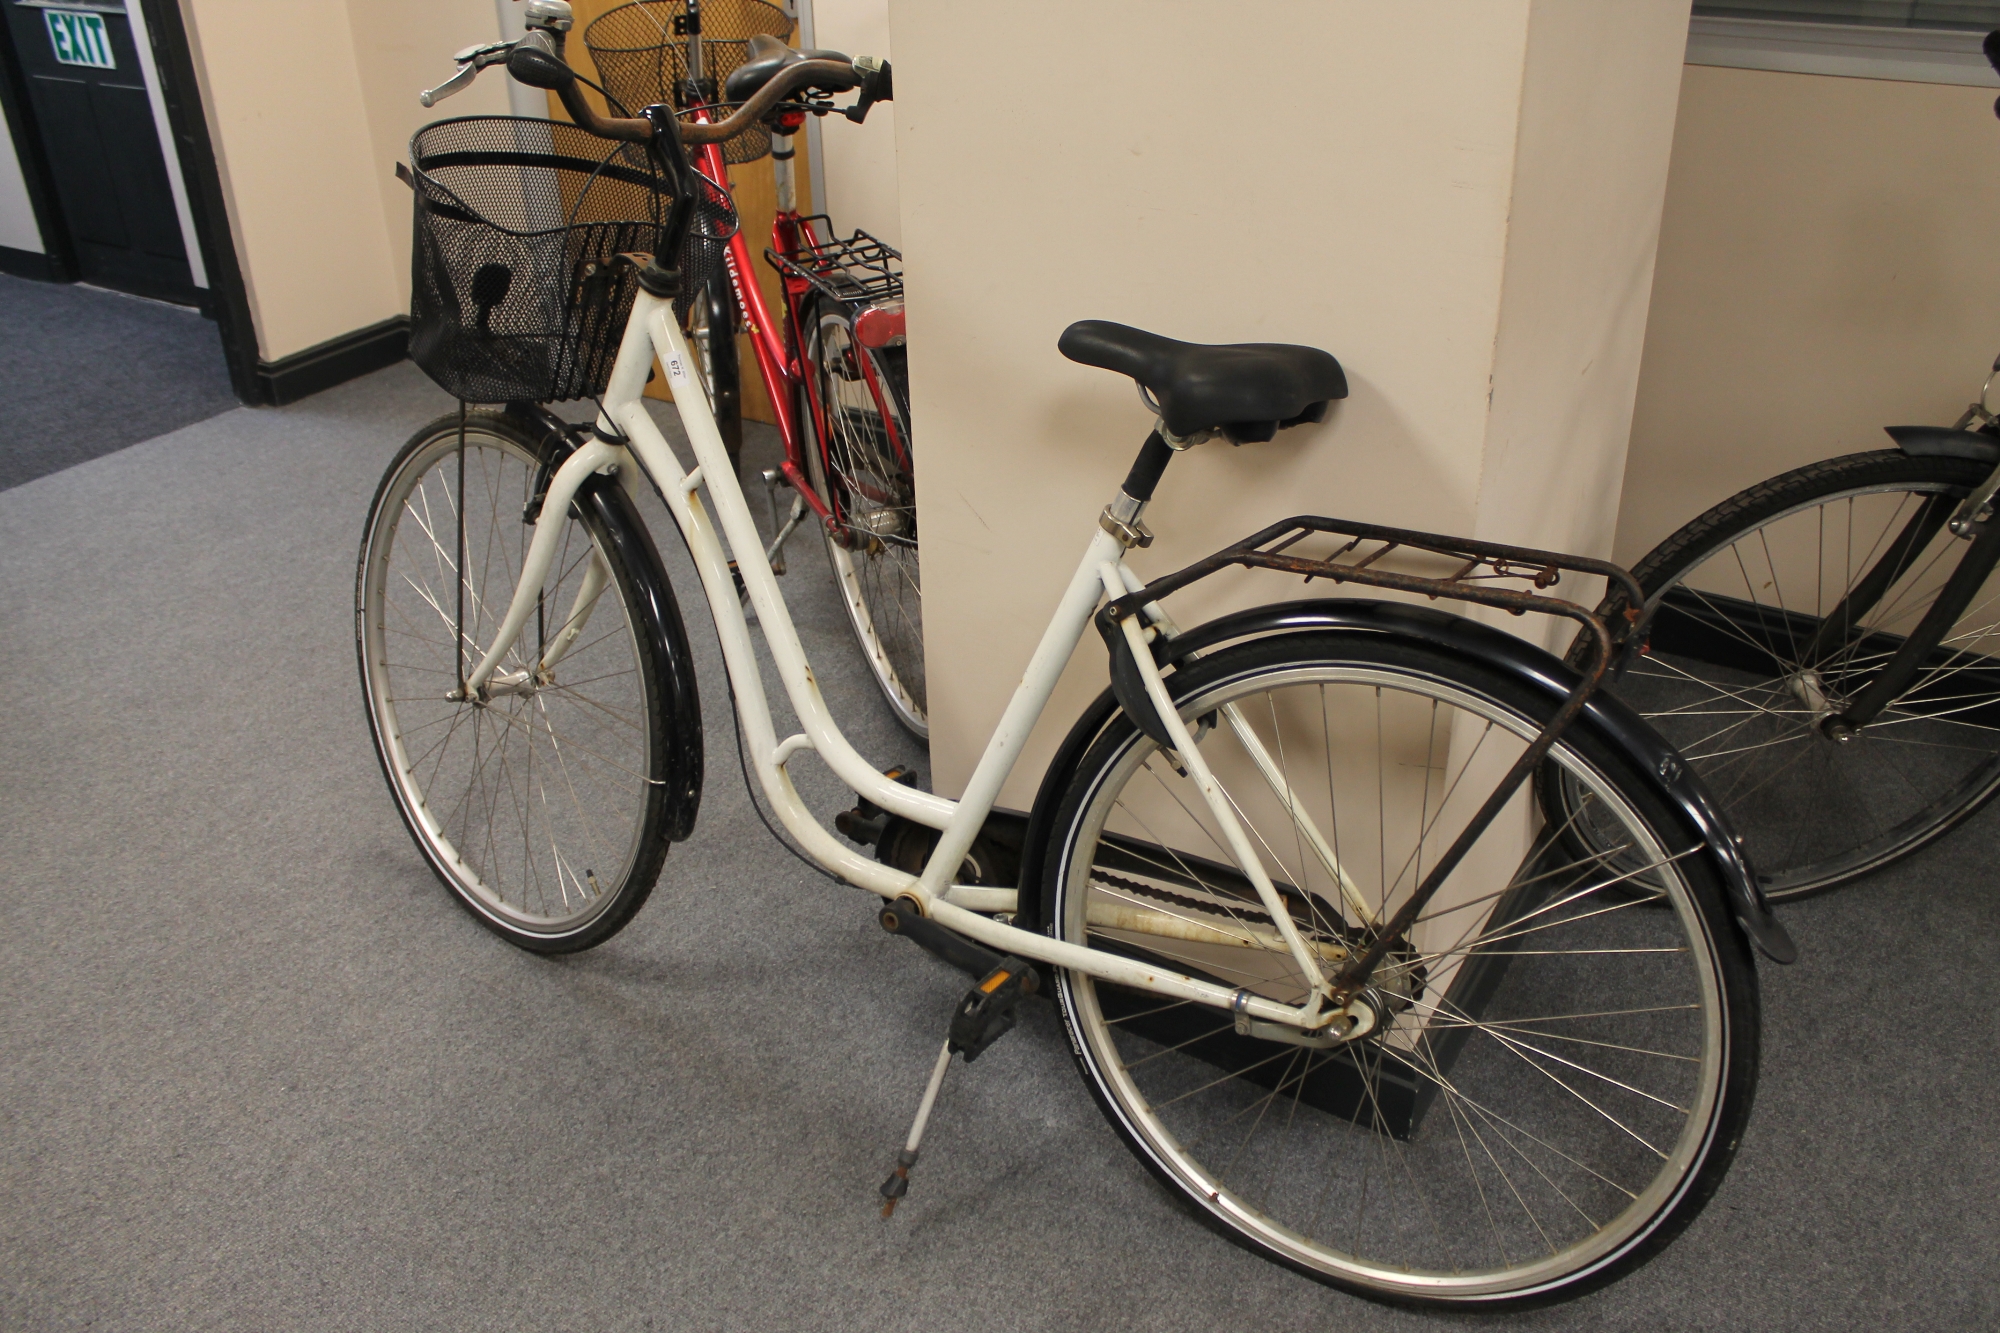 A lady's hybrid bike with front shopping basket (rear wheel locked)